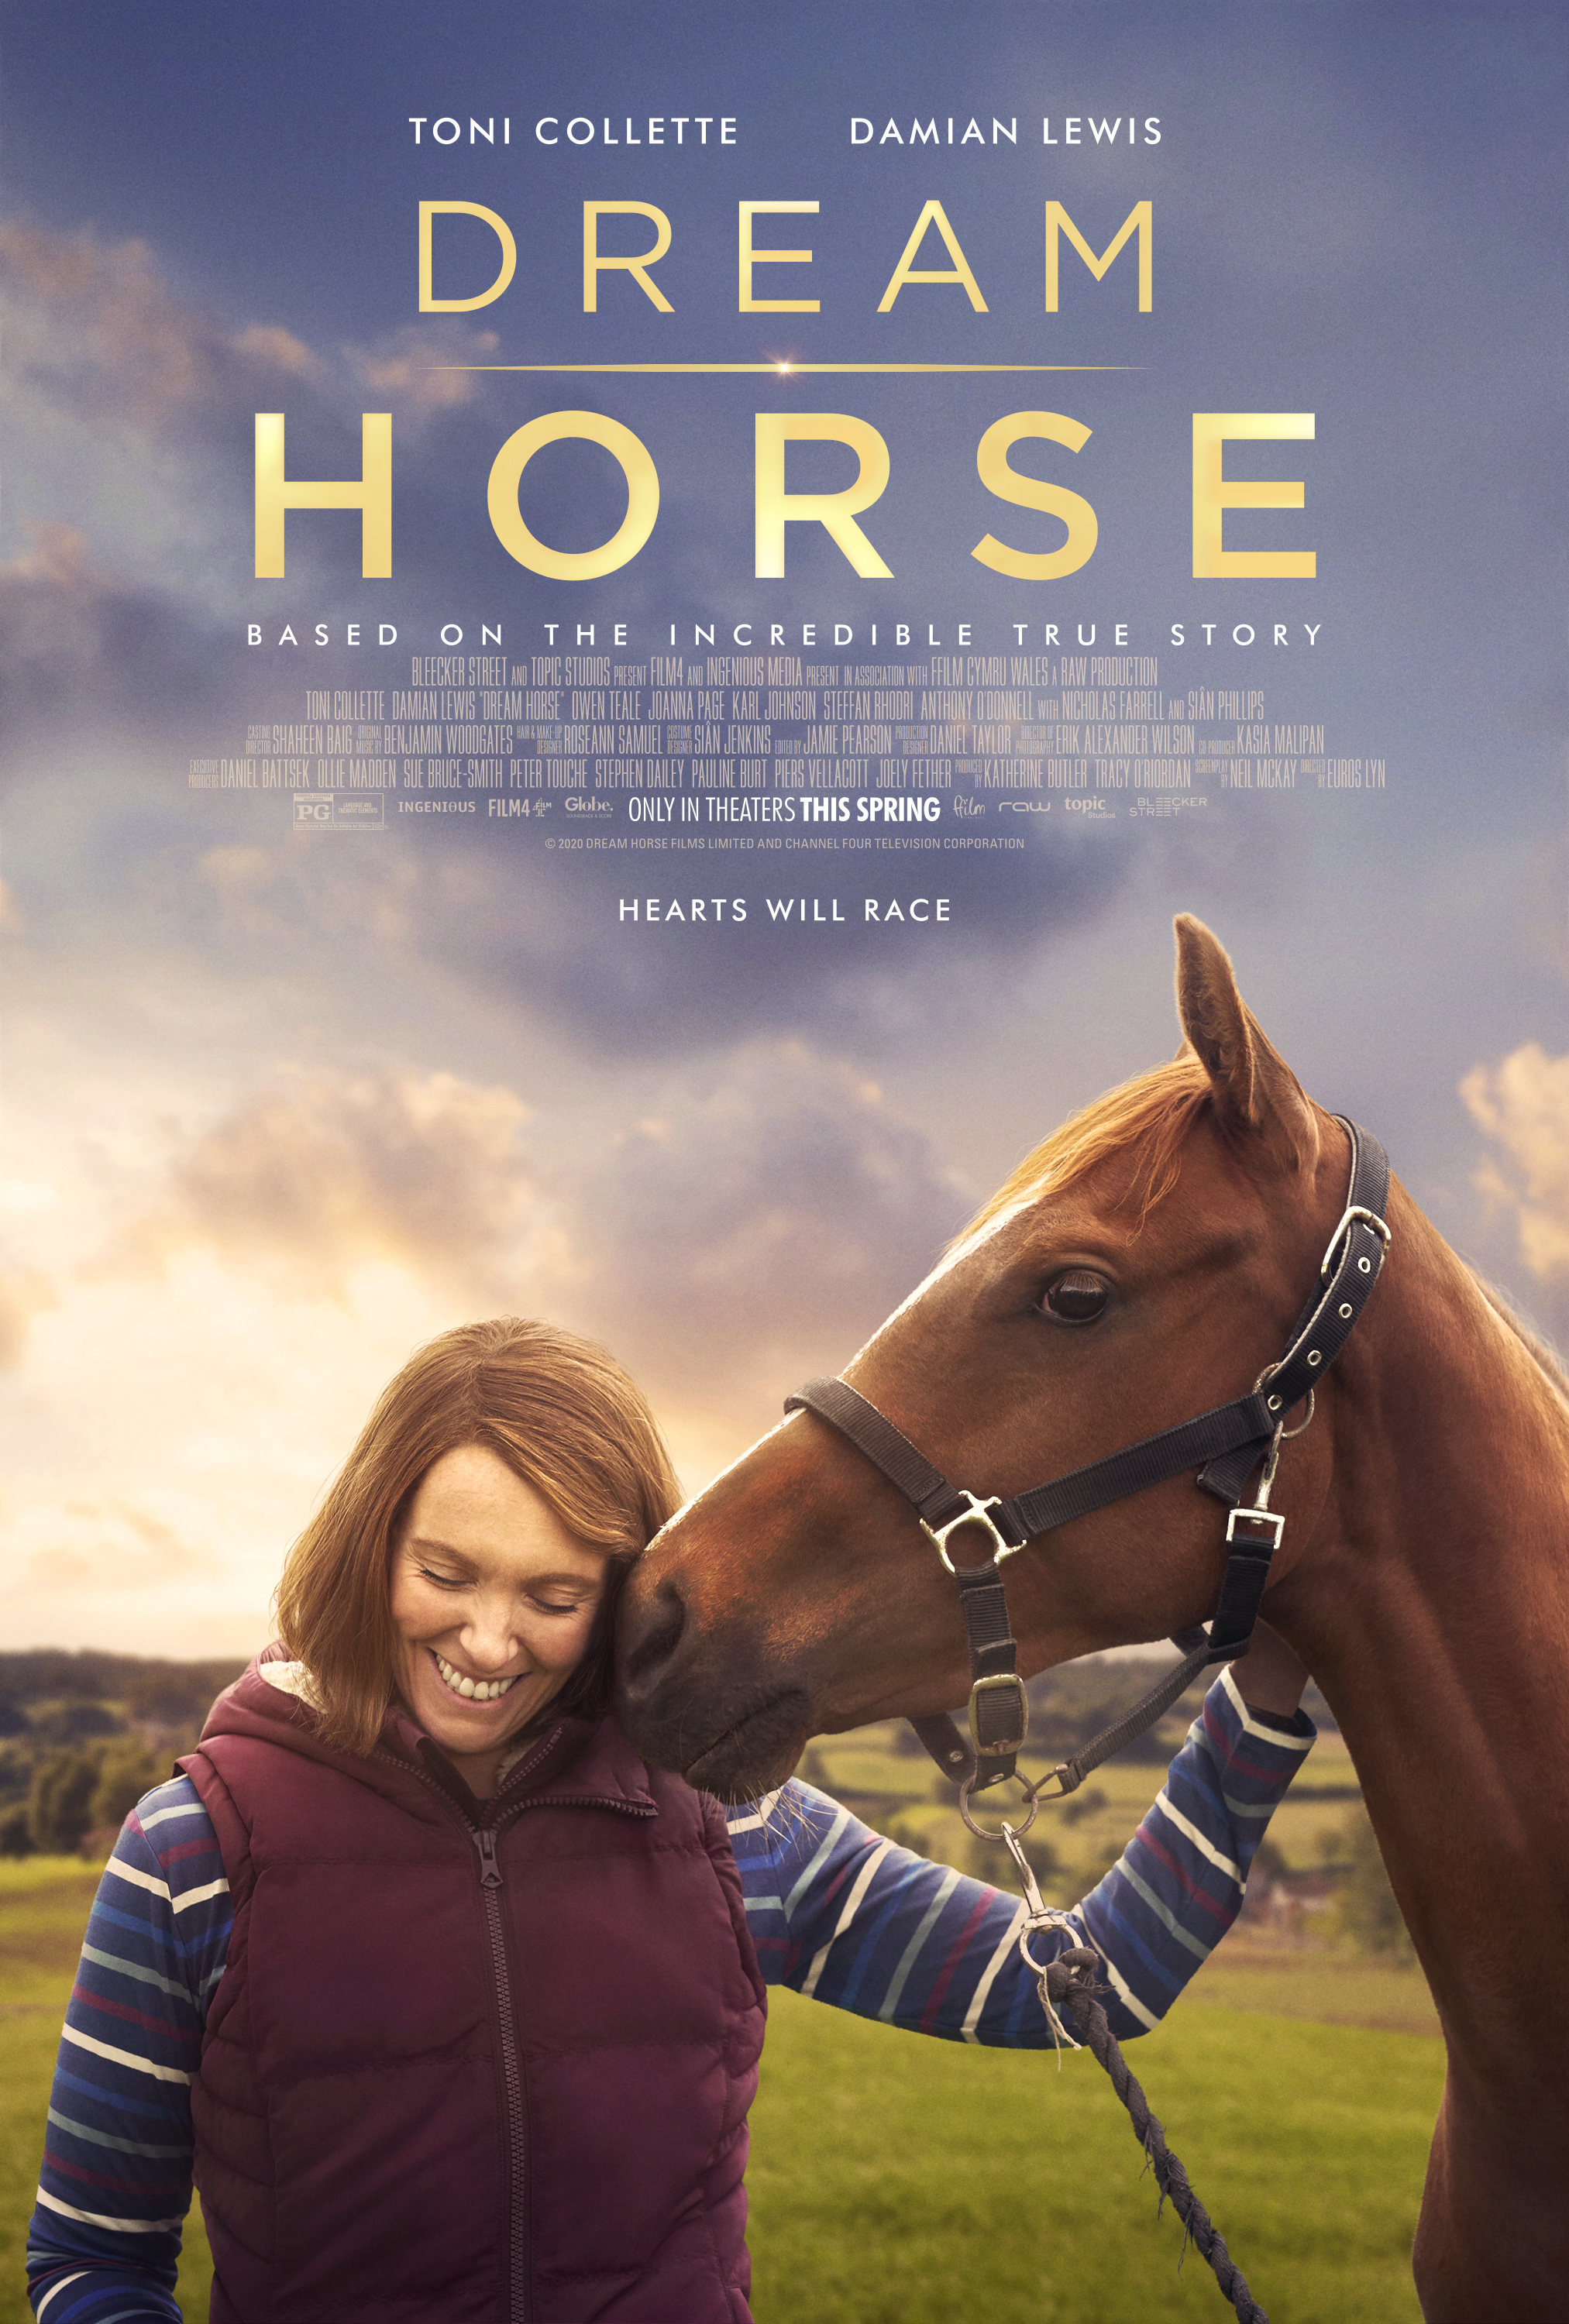 Image of a woman with a horse, title dream horse